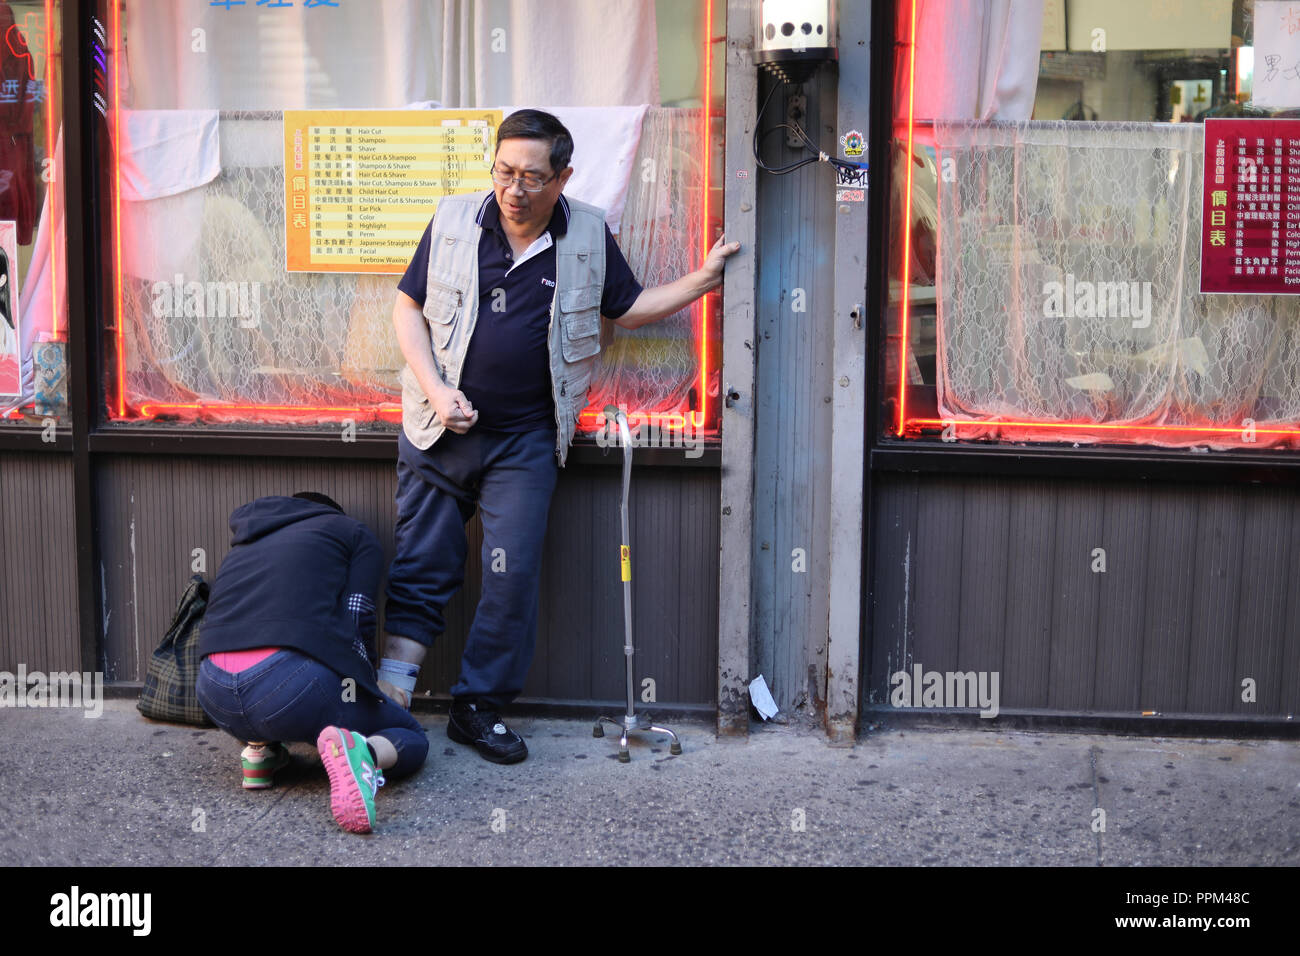 Chinatown, New York - February 10, 2016: Unidentified person helping an unidentified handicaped man in Manhattan, New York City Stock Photo